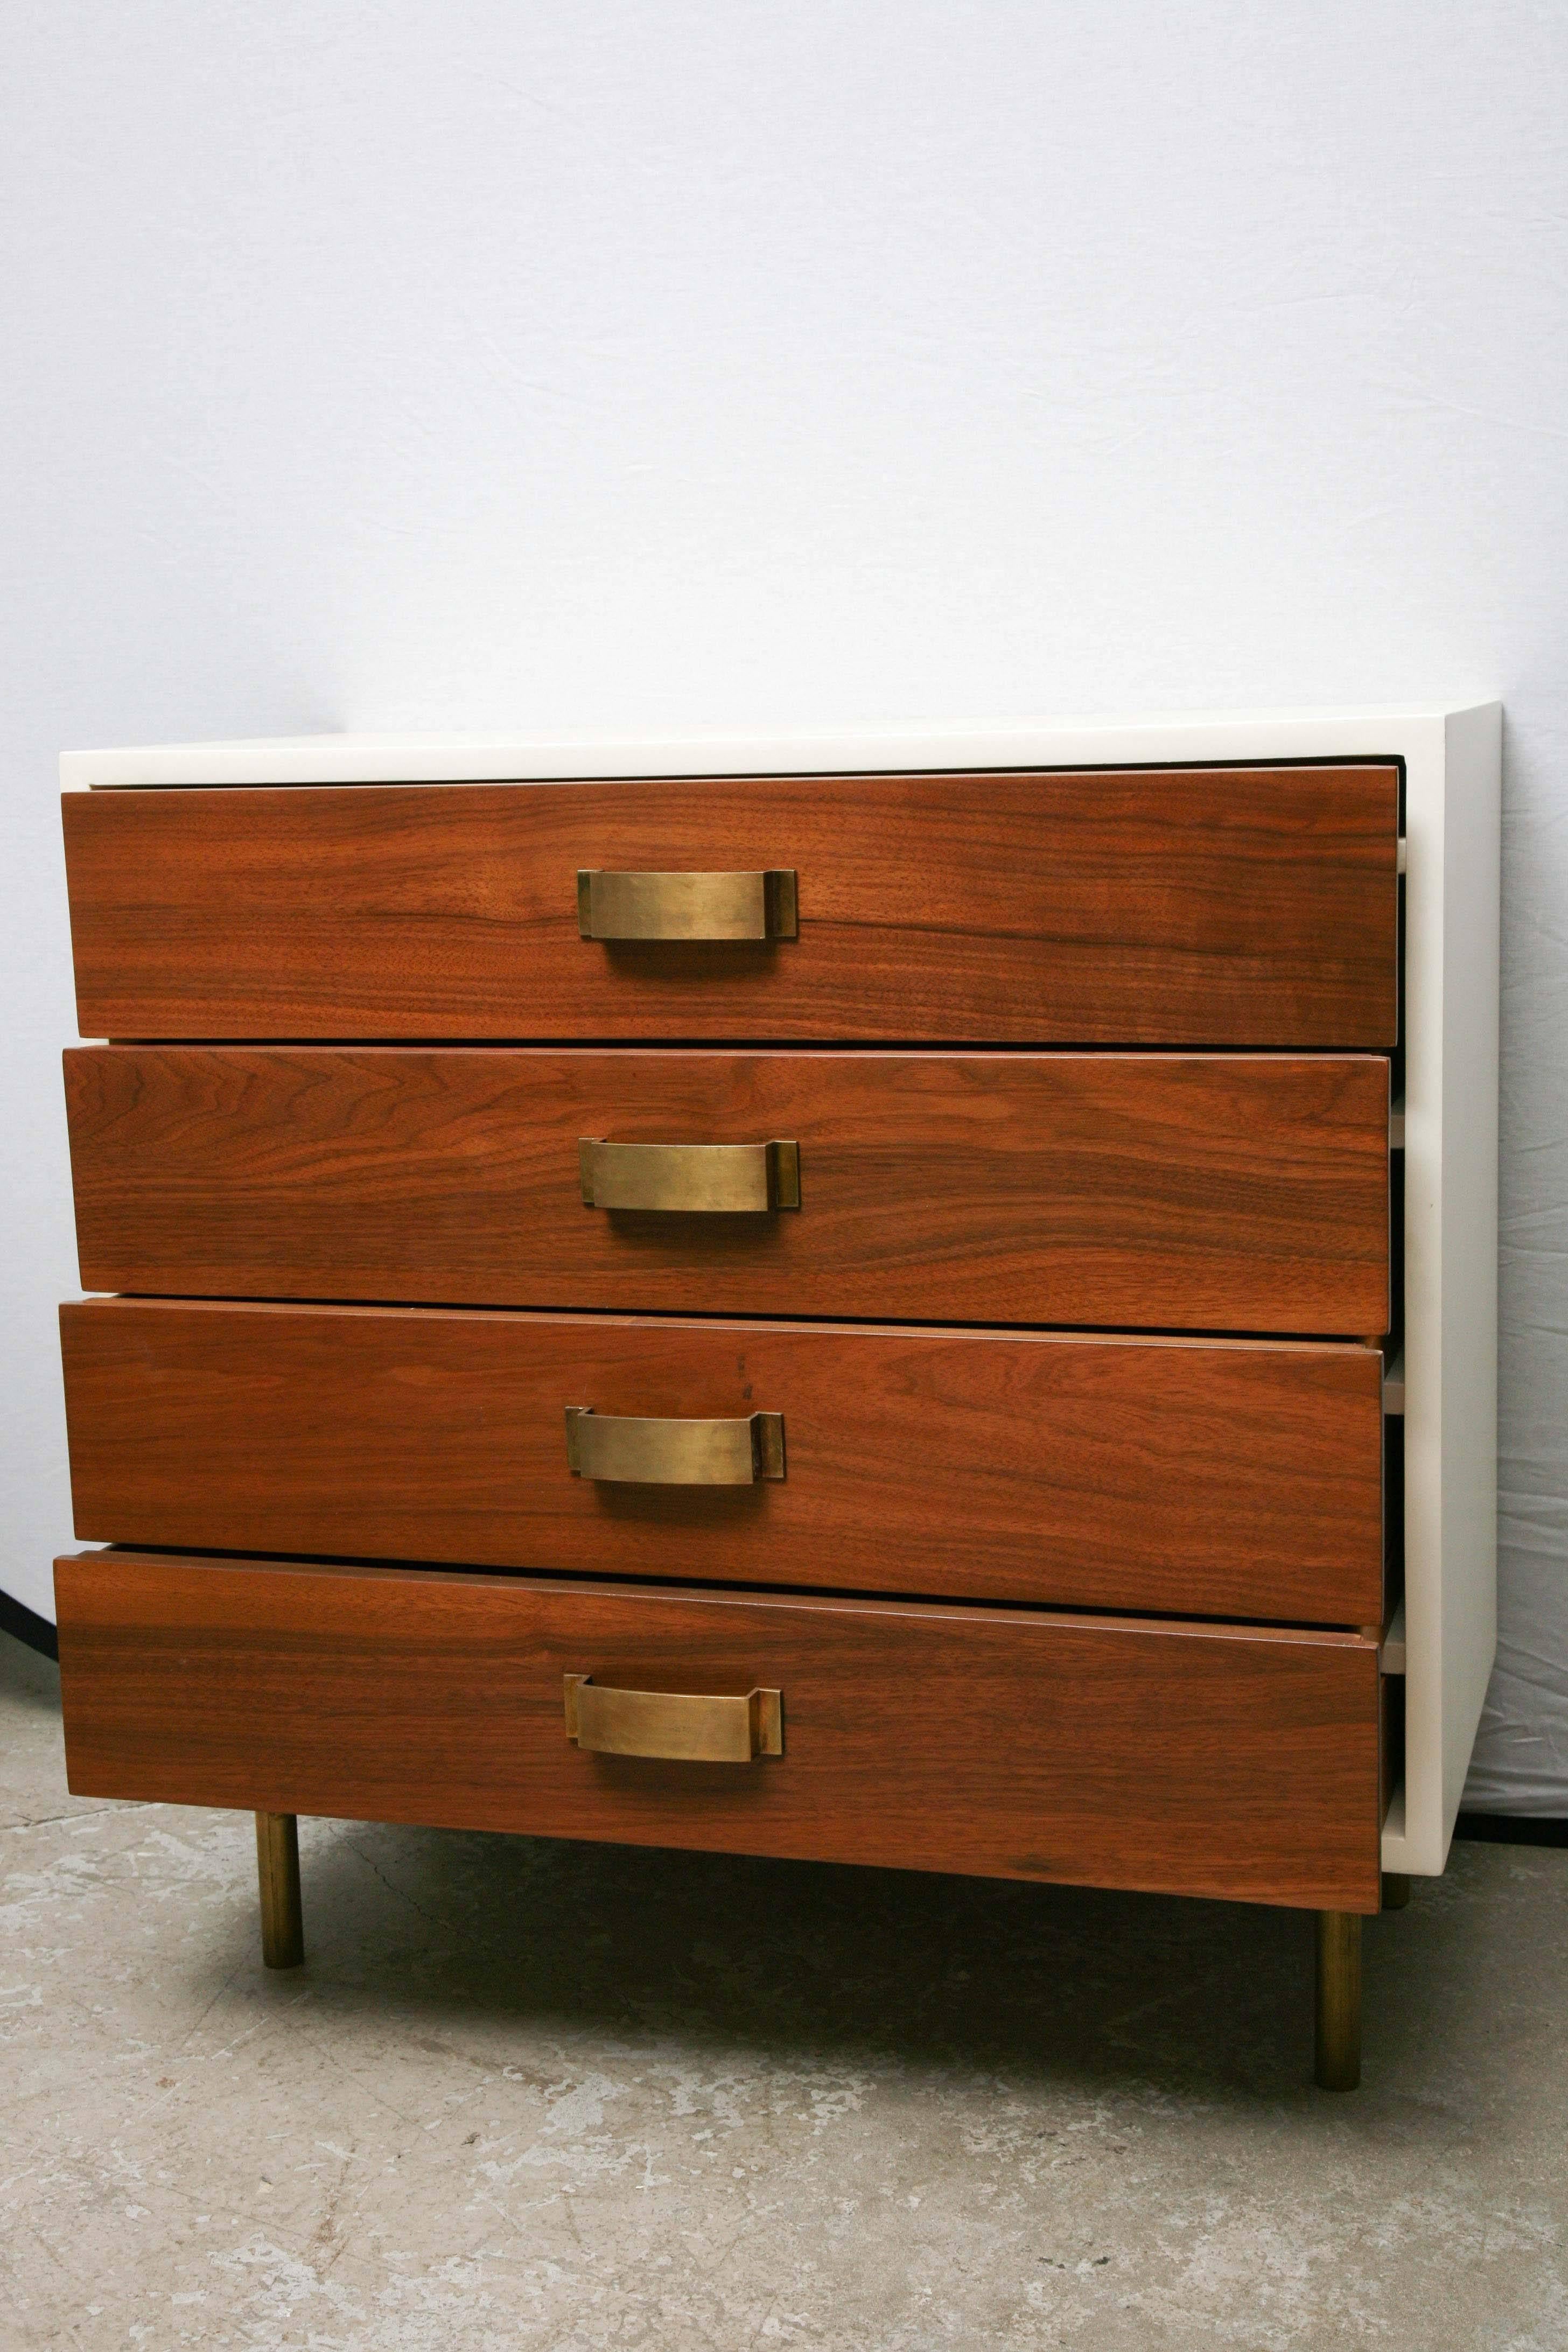 Painted Pair of Mid-Century Modern Two-Tone Wood Cabinets Commodes Nightstands